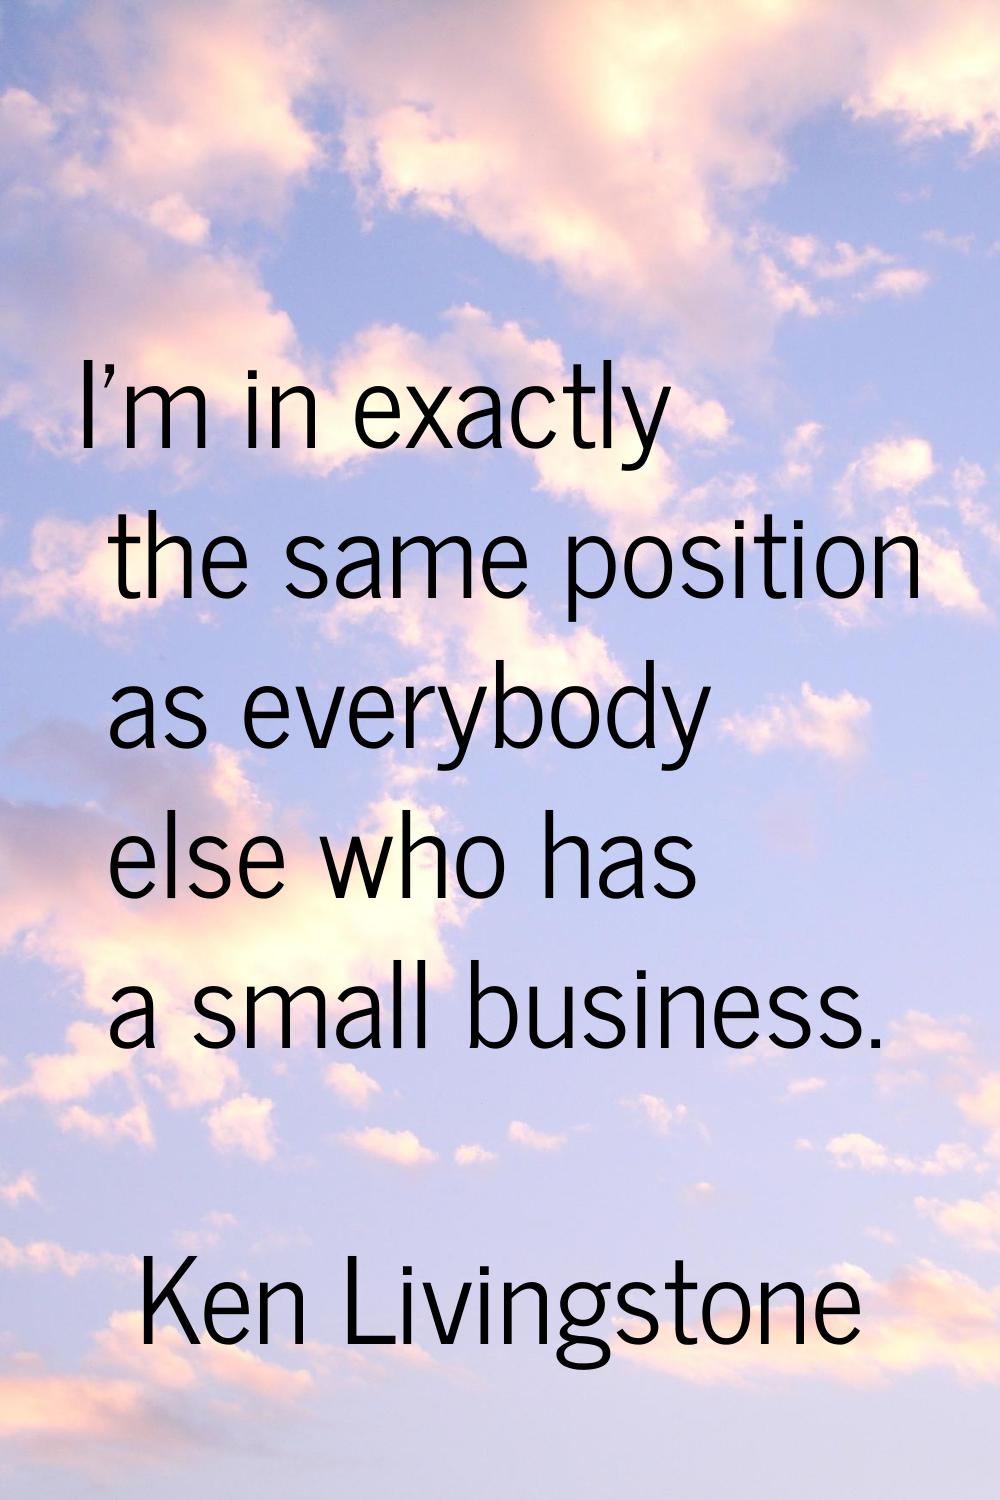 I'm in exactly the same position as everybody else who has a small business.